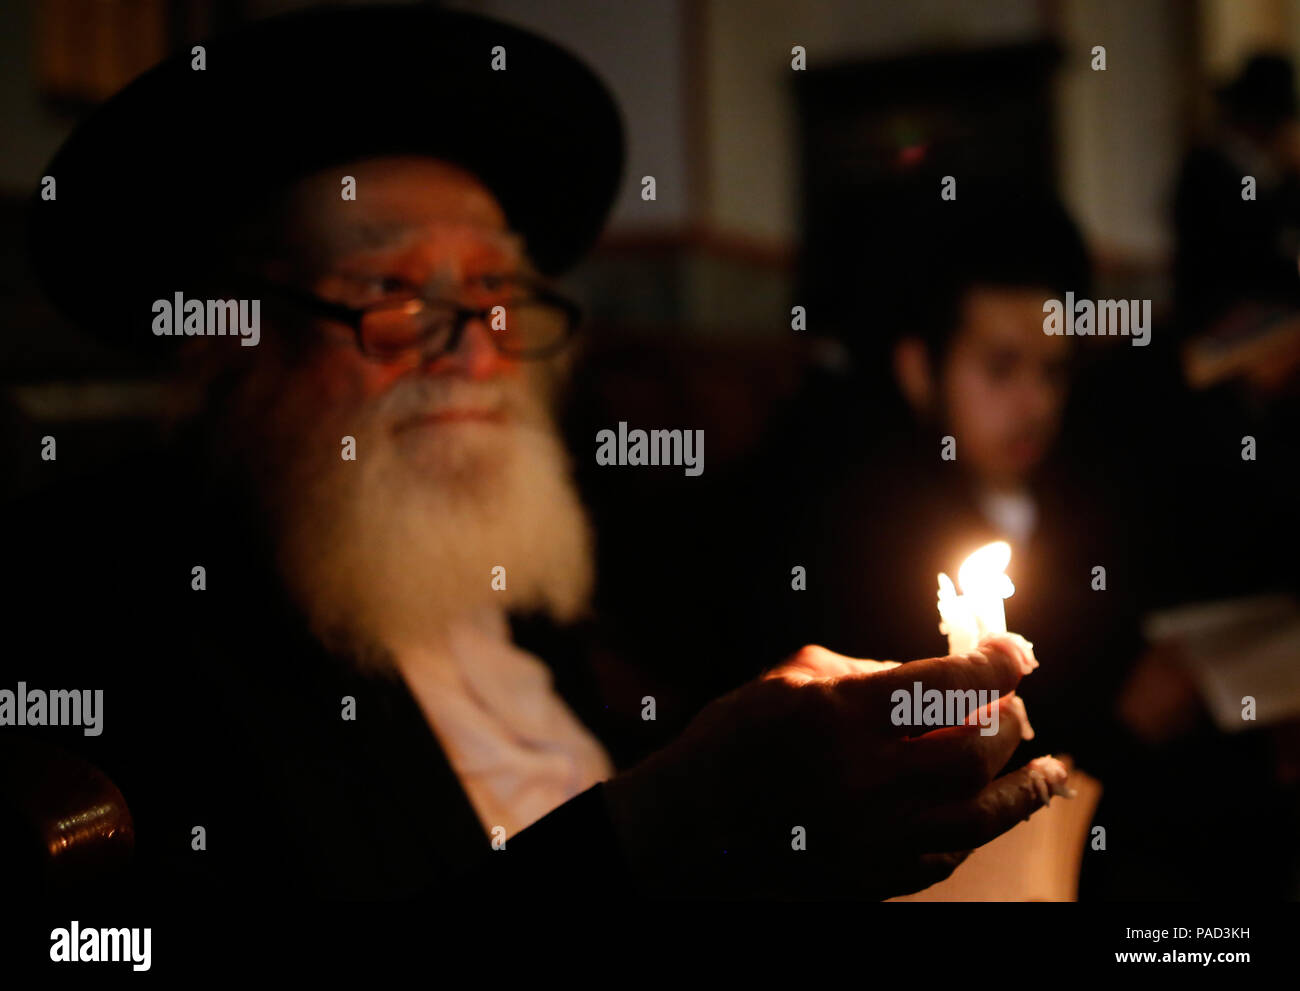 Jerusalem. 21st July, 2018. Ultra-Orthodox Jewish men use candles to read from the book of Eicha (Book of Lamentations) during the annual Tisha B'Av (Ninth of Av) fasting and a memorial day in the Ultra-Orthodox neighborhood of Mea Shearim in Jerusalem, on July 21, 2018. Credit: Gil Cohen Magen/Xinhua/Alamy Live News Stock Photo